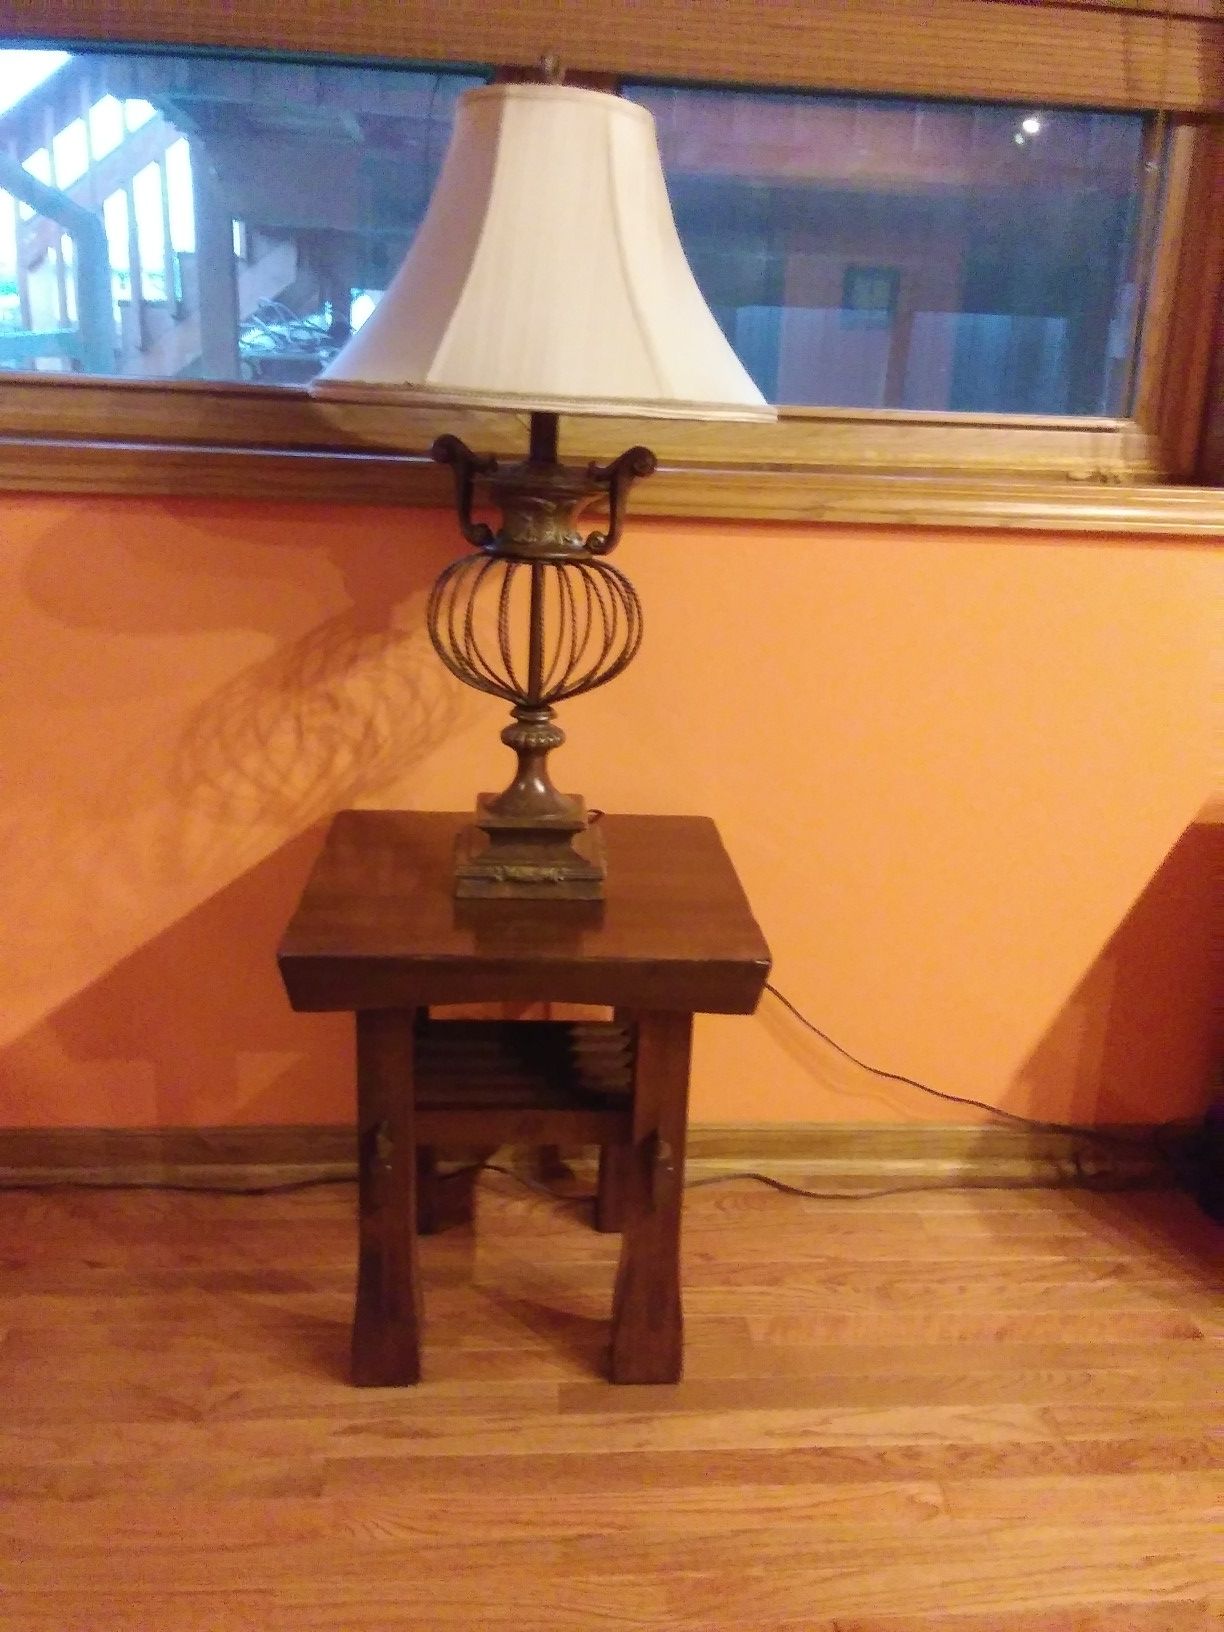 Two matching solid wood end tables. Pick up and cash only.